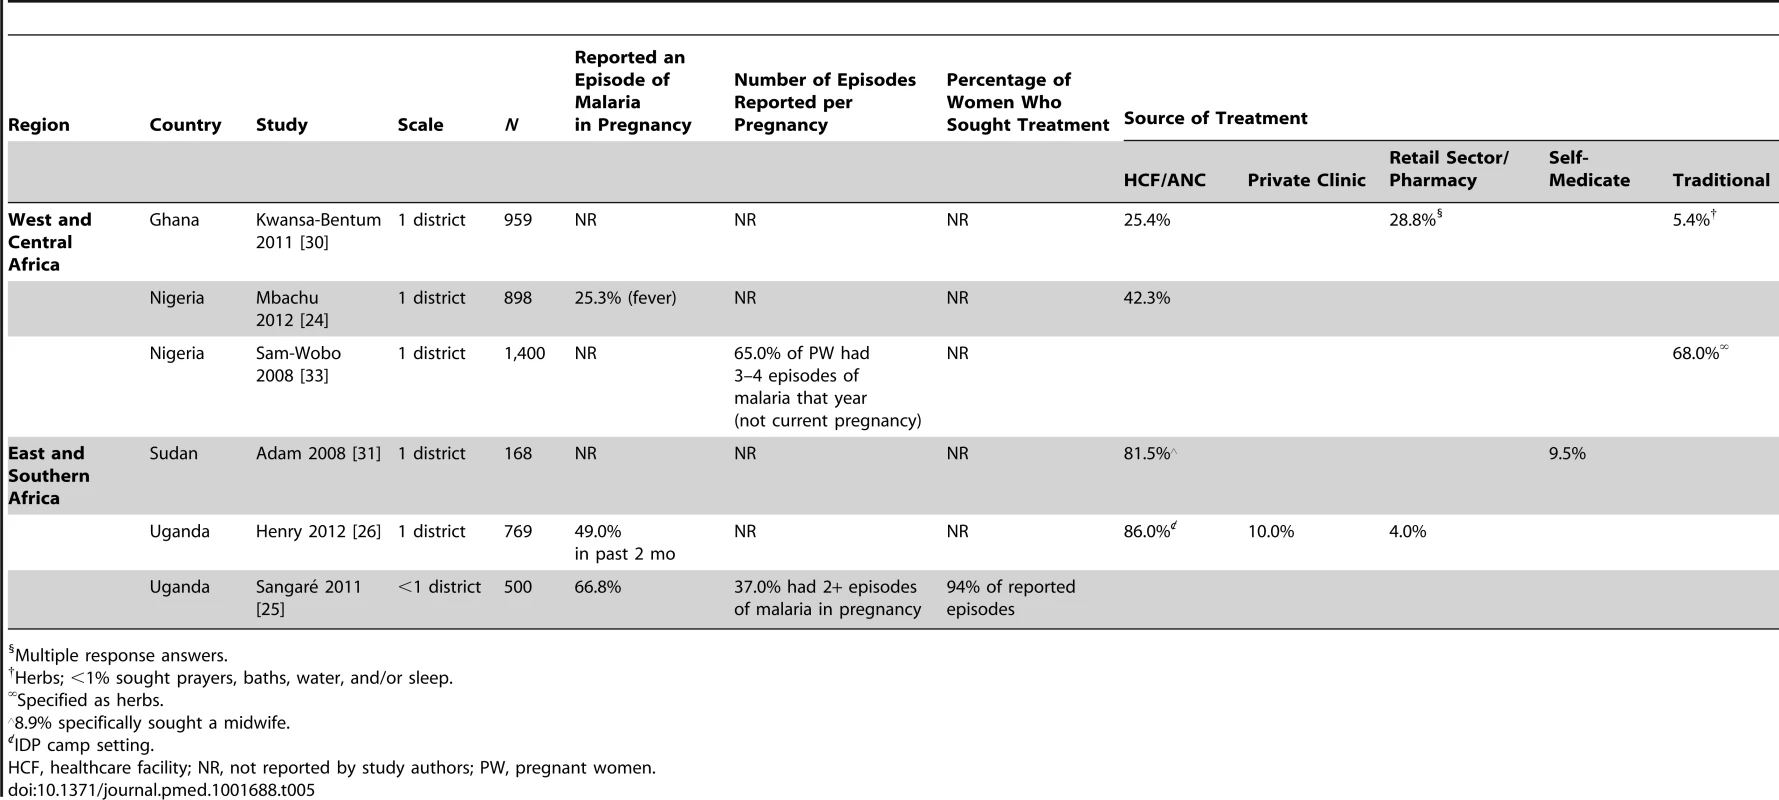 Symptoms and number of episodes of malaria in pregnancy, and percentage who sought treatment by source, reported by pregnant women: population-based studies.